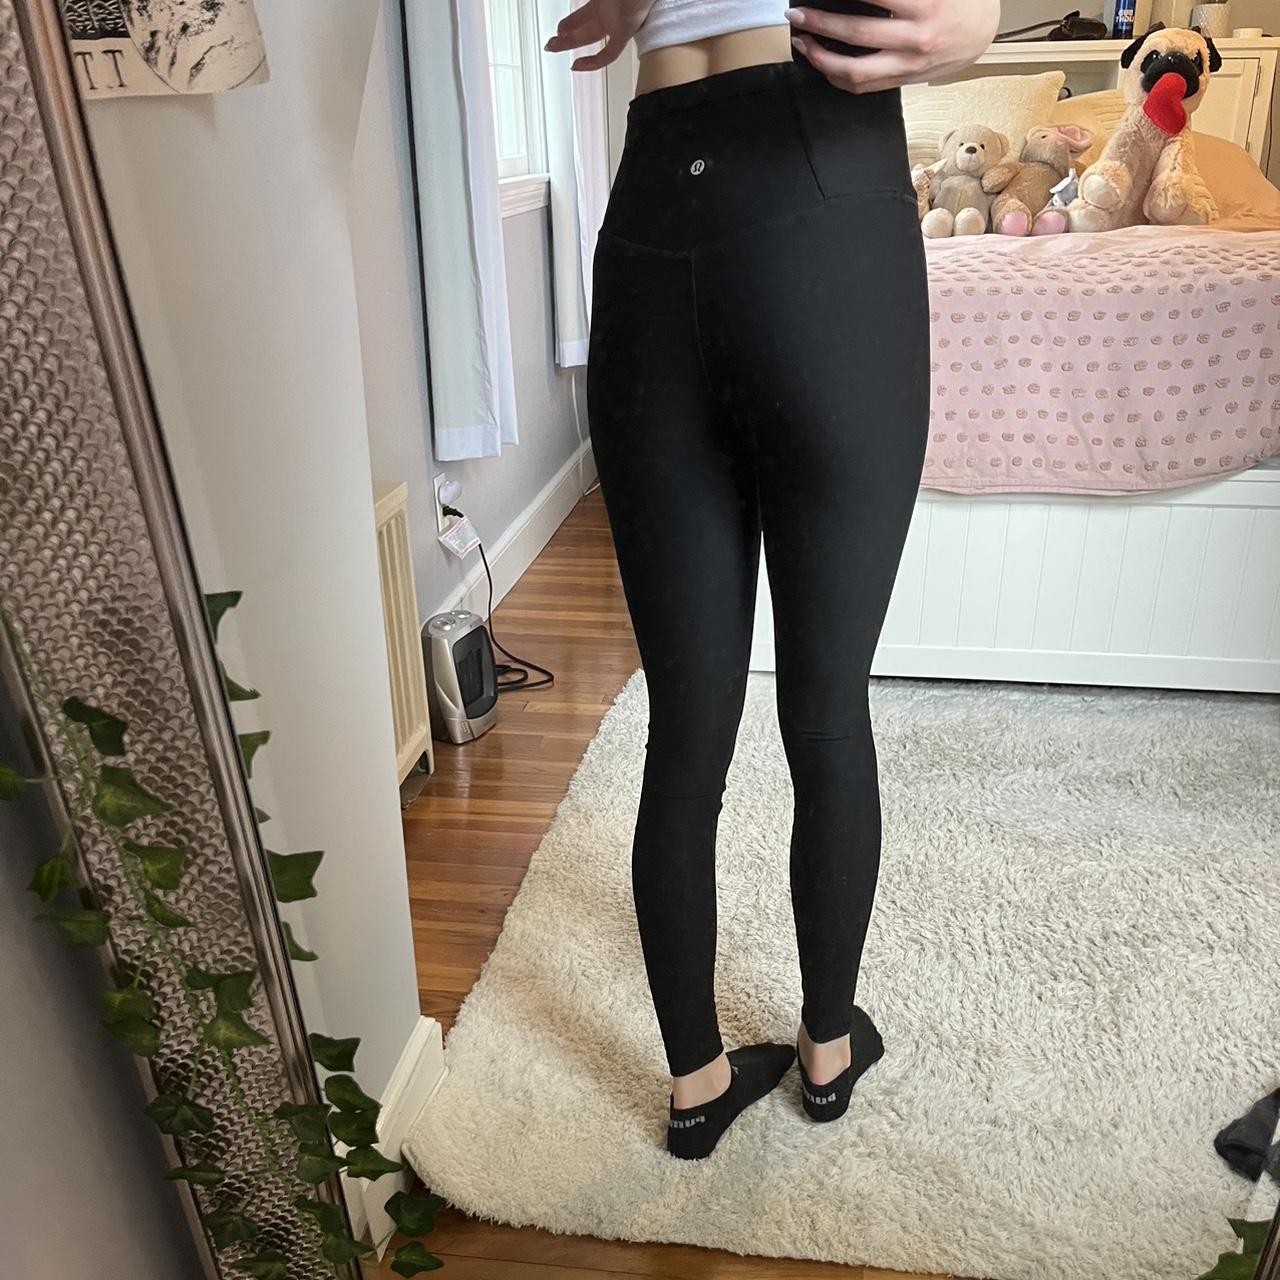 These Lululemon leggings are perfect for any - Depop